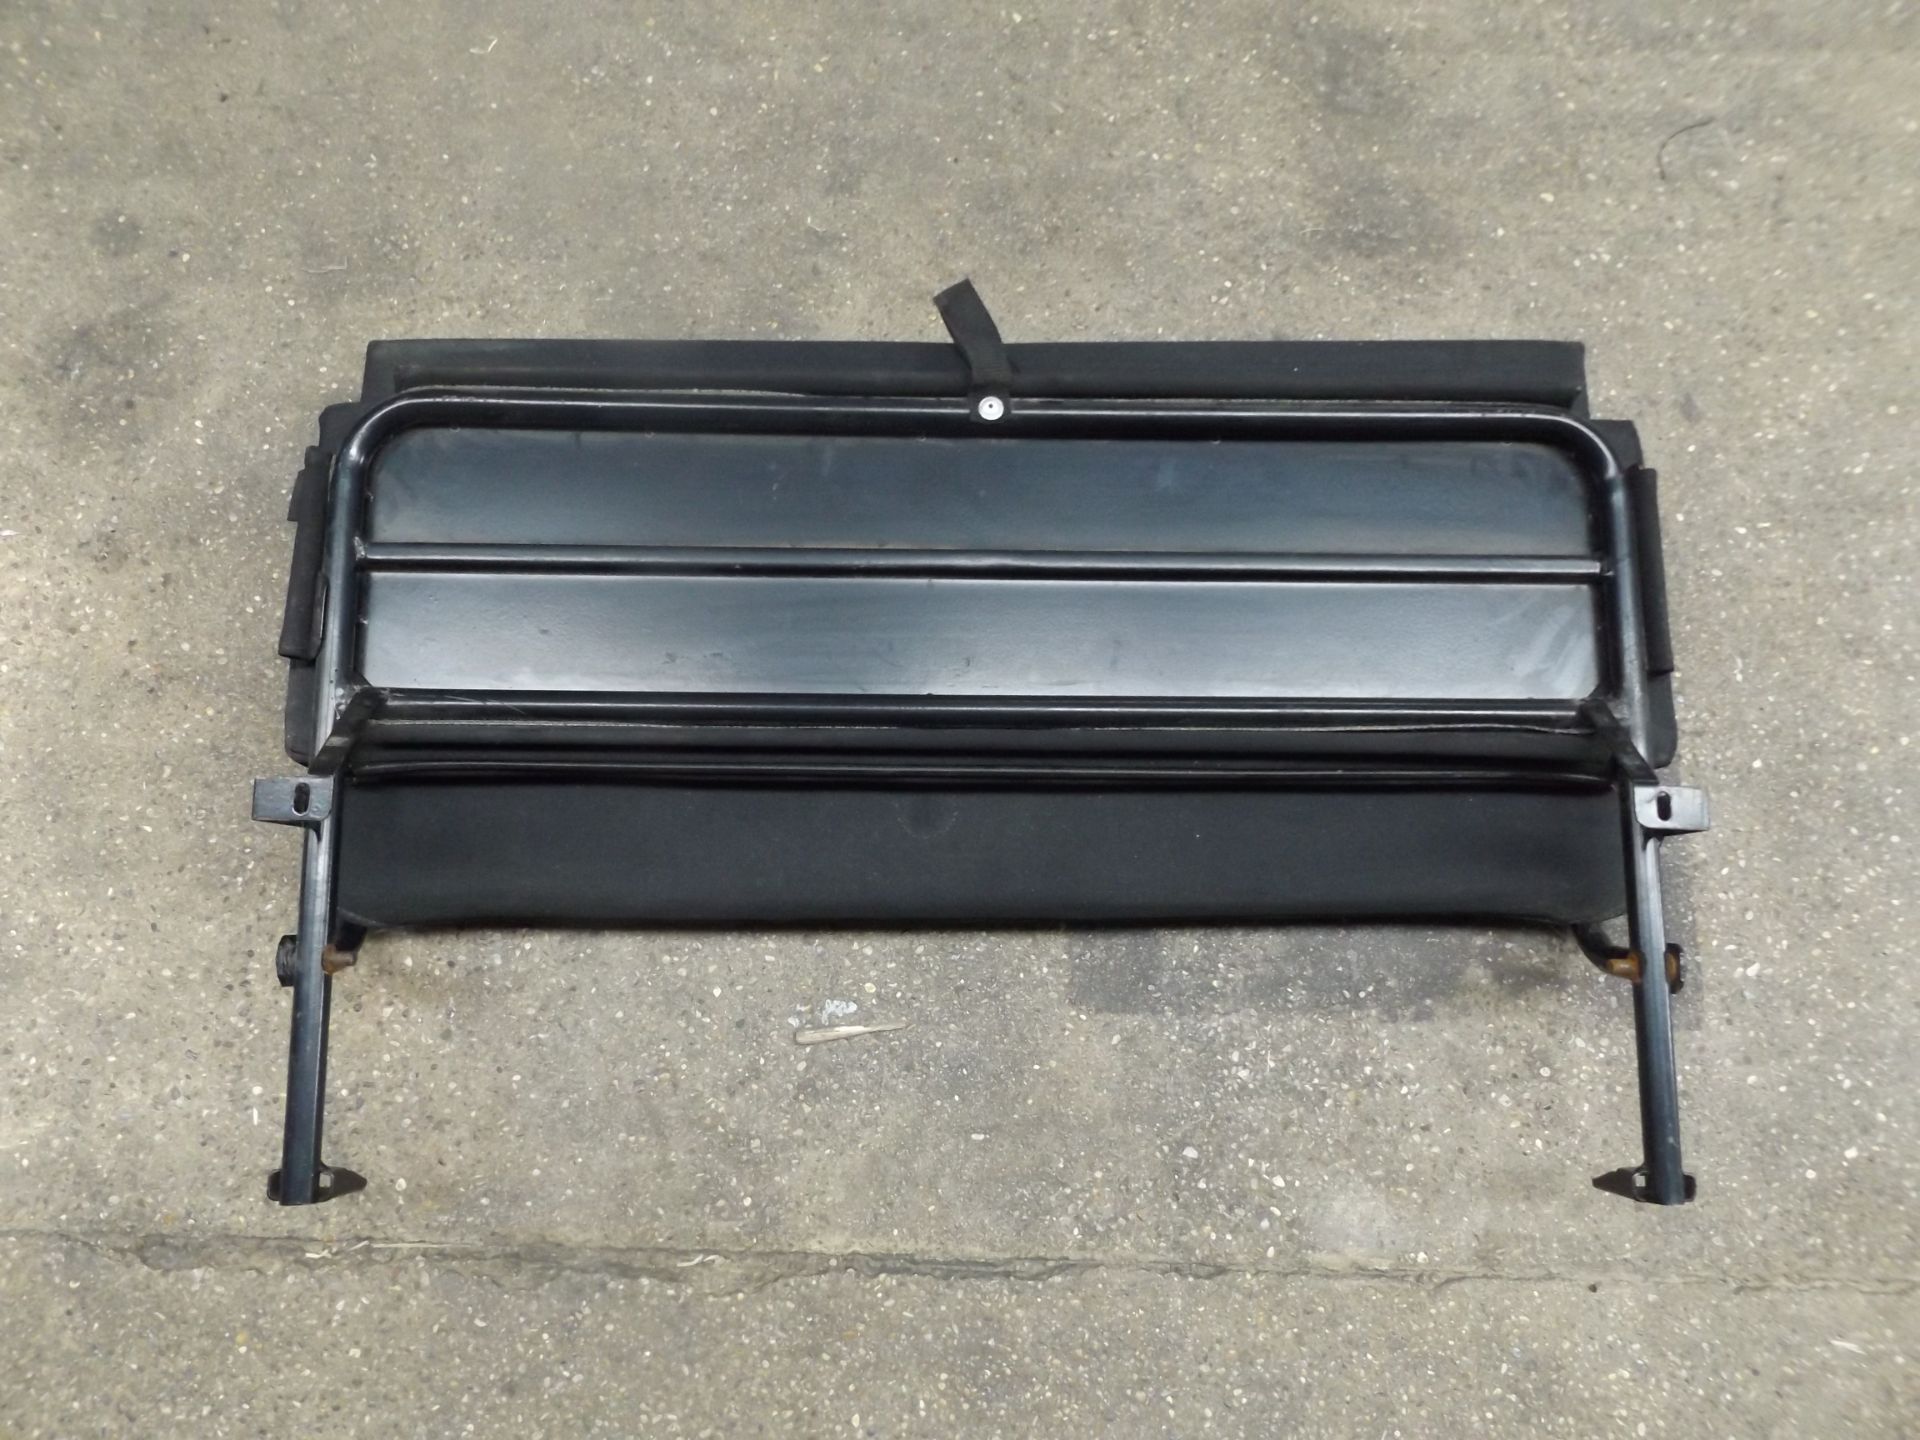 2 x Land Rover Wolf Bench Seats - Image 8 of 9